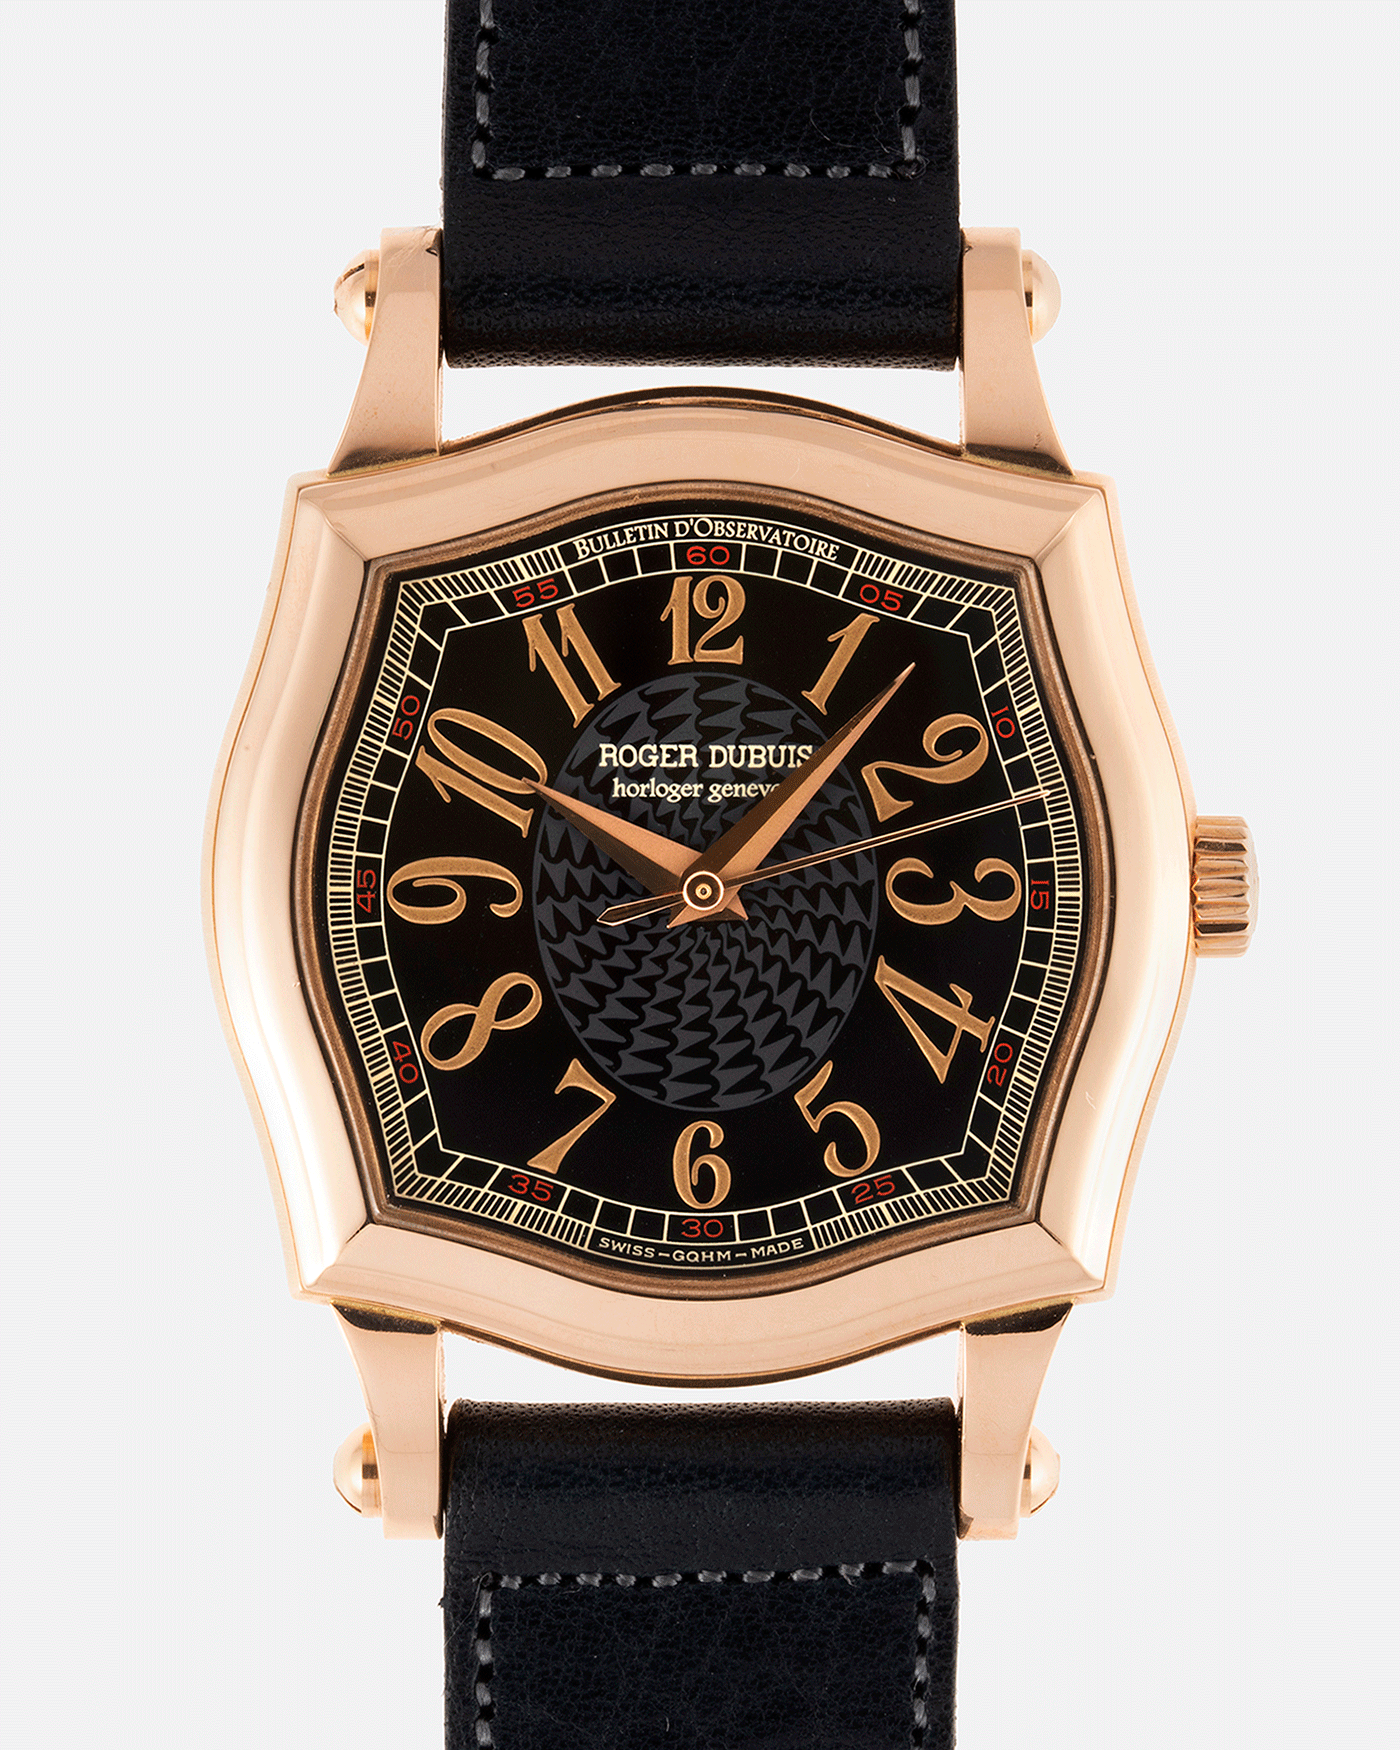 Brand: Roger Dubuis Year: 1998 Model: Sympathie 34 Material: 18k Rose Gold Movement: Cal RD 57 Case Diameter: 34mm Strap: Navy Blue Accurate Form Japanese Calf Leather and 18k Rose Gold Roger Dubuis Tang Buckle